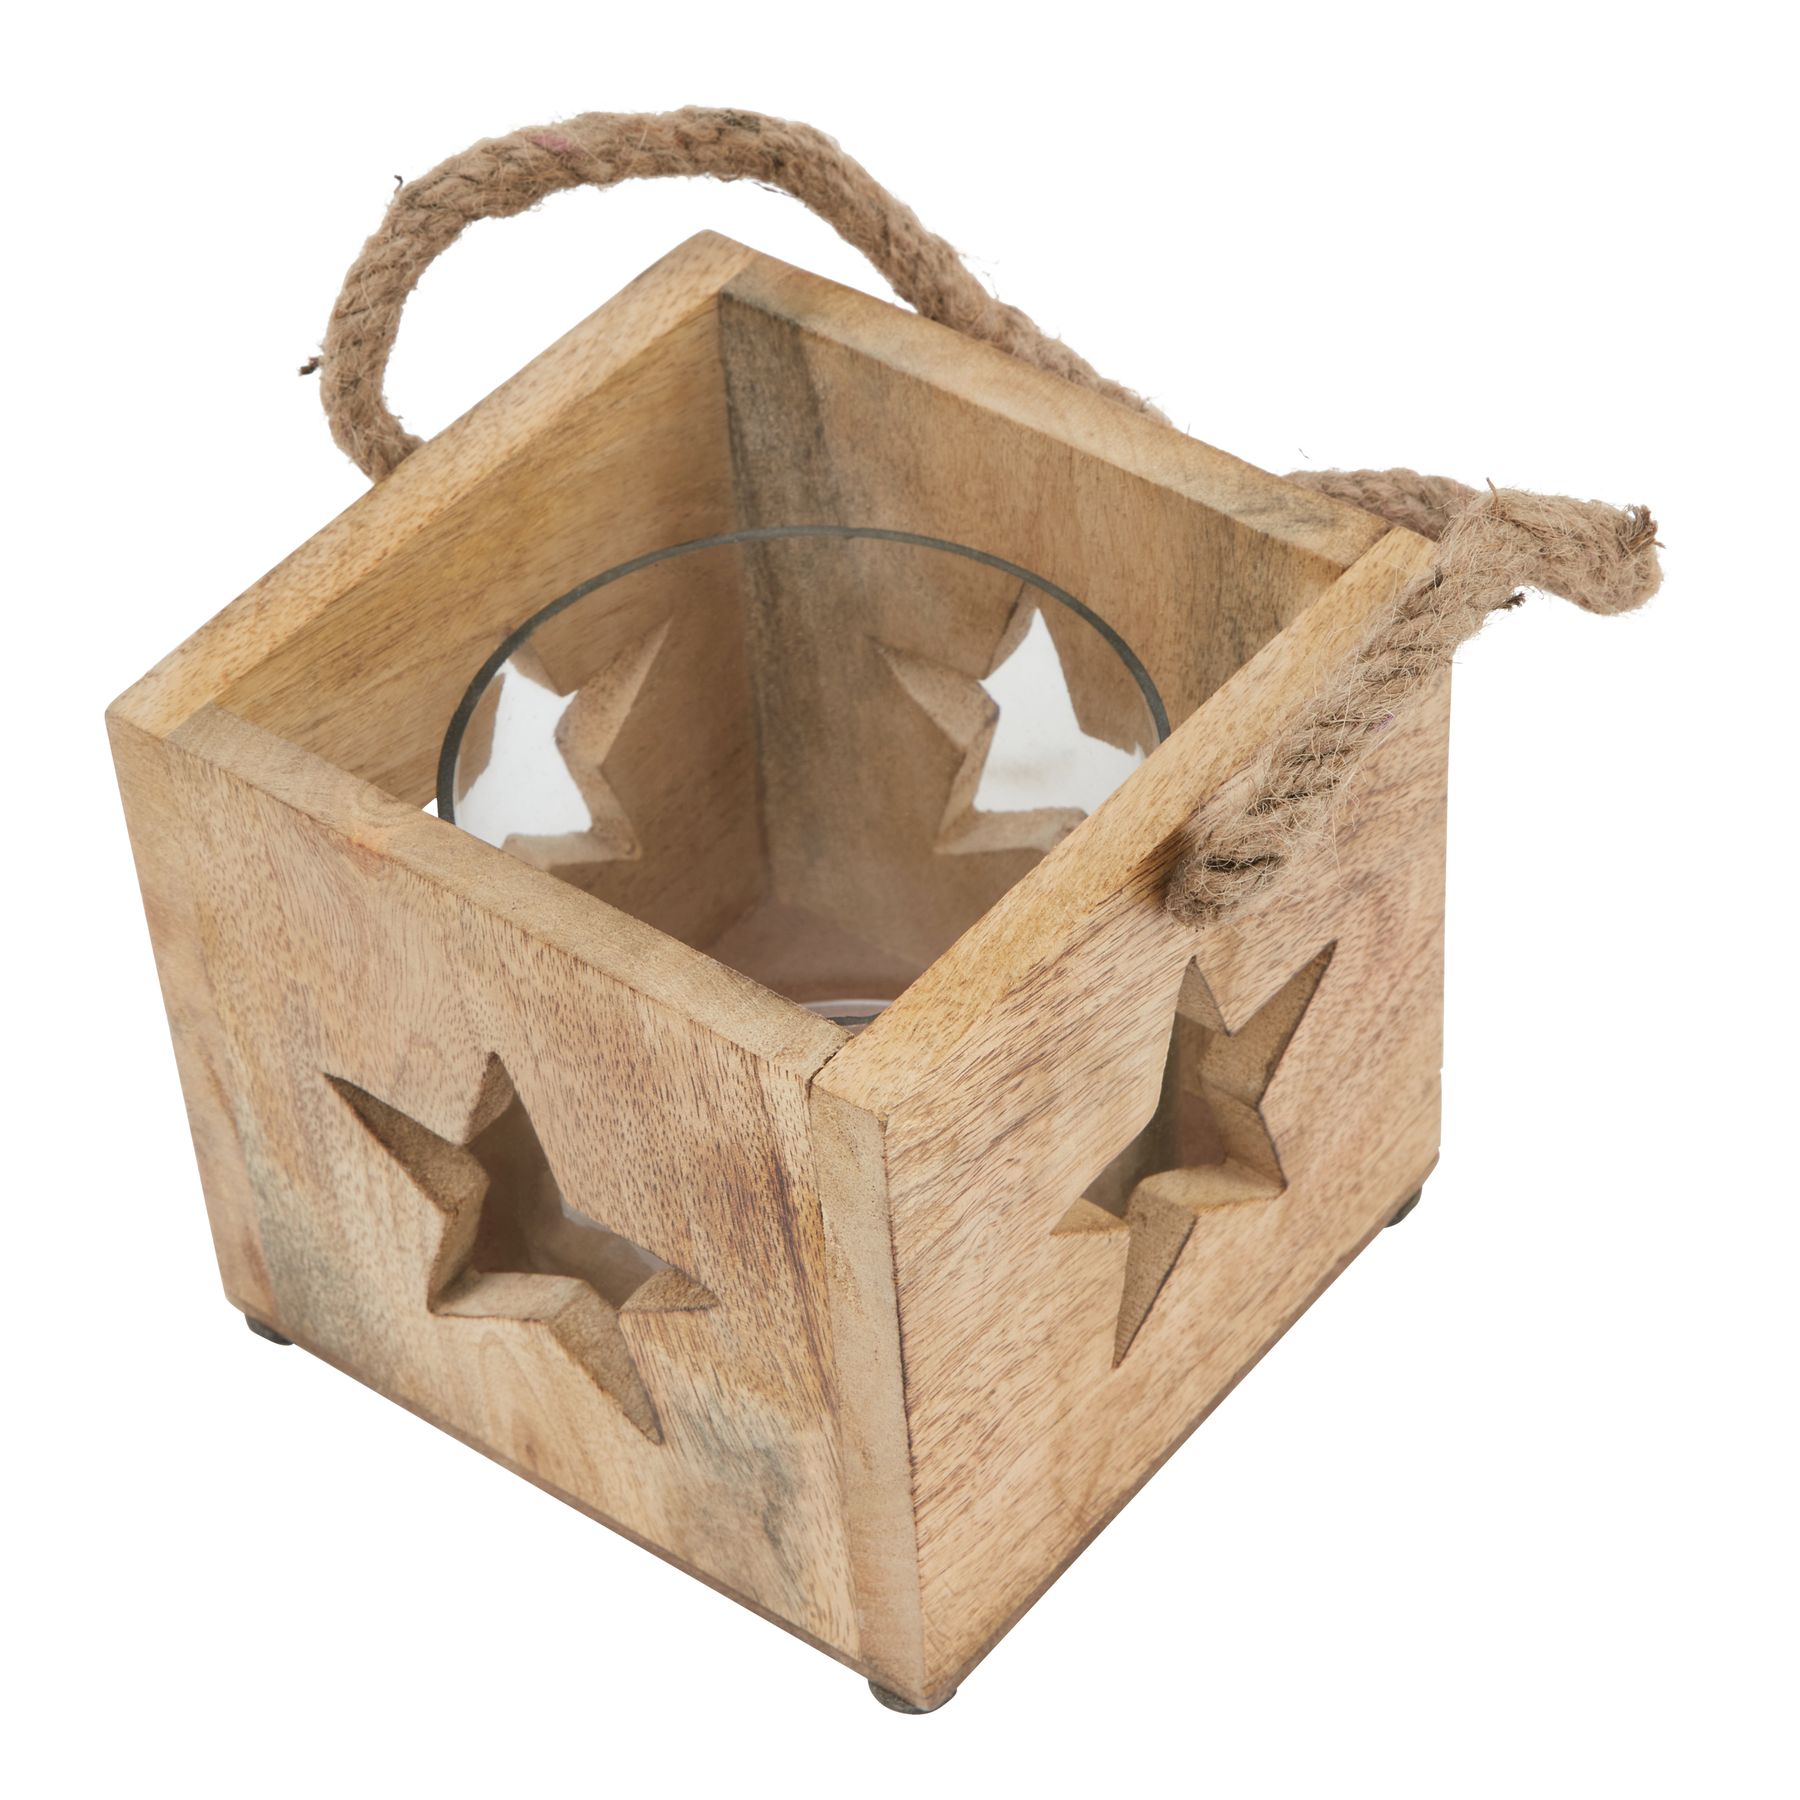 Natural Wooden Star Tealight Candle Holder - Image 2